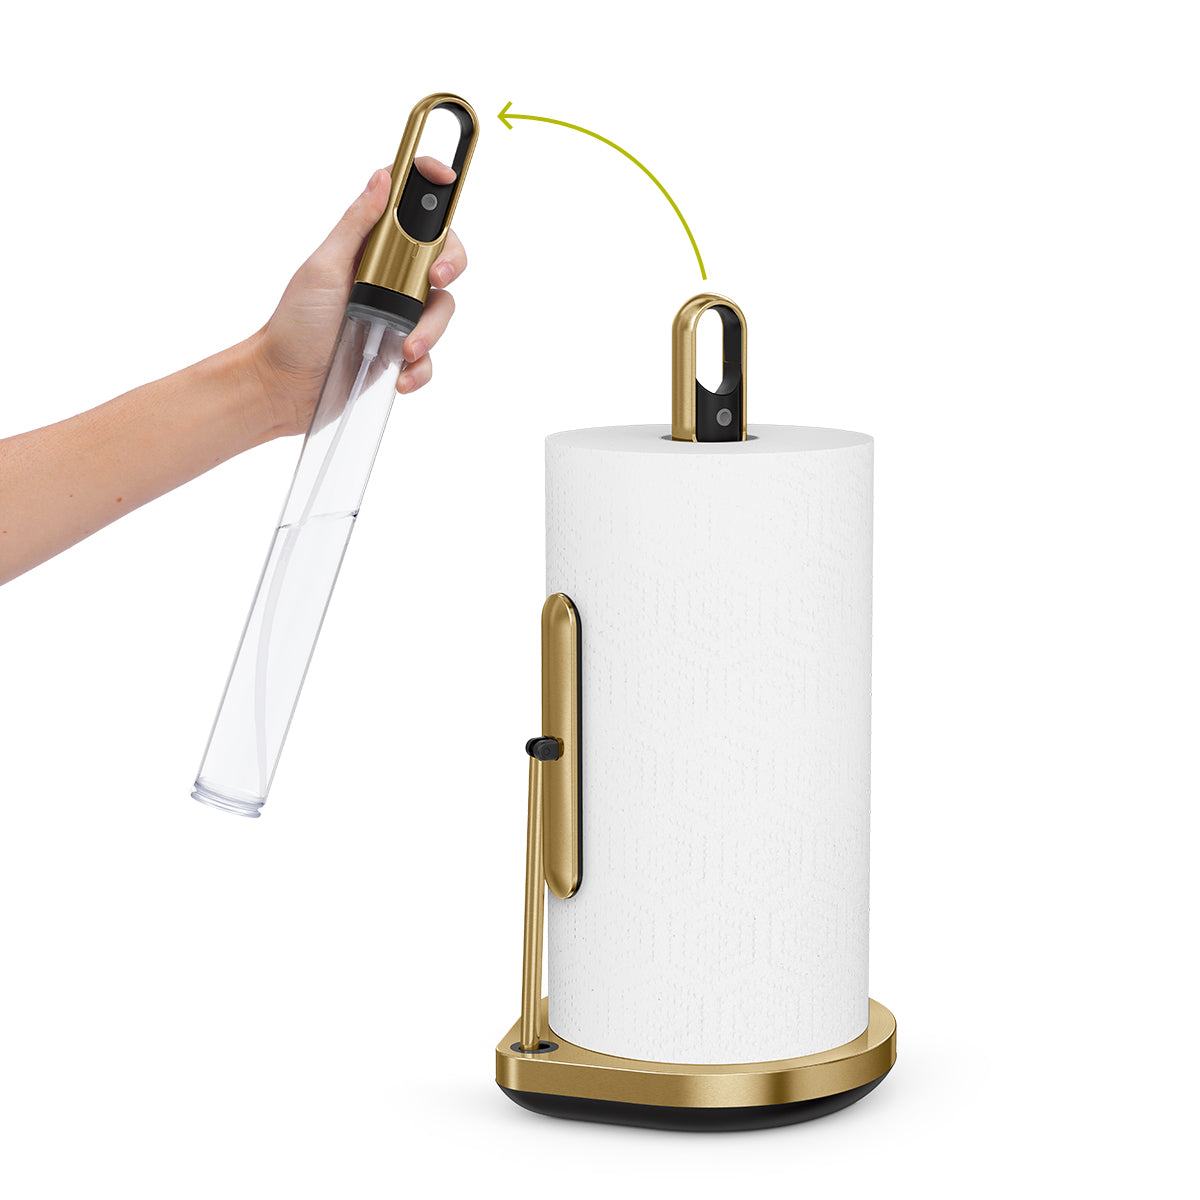 Paper towel holder with built in spray bottle?! 